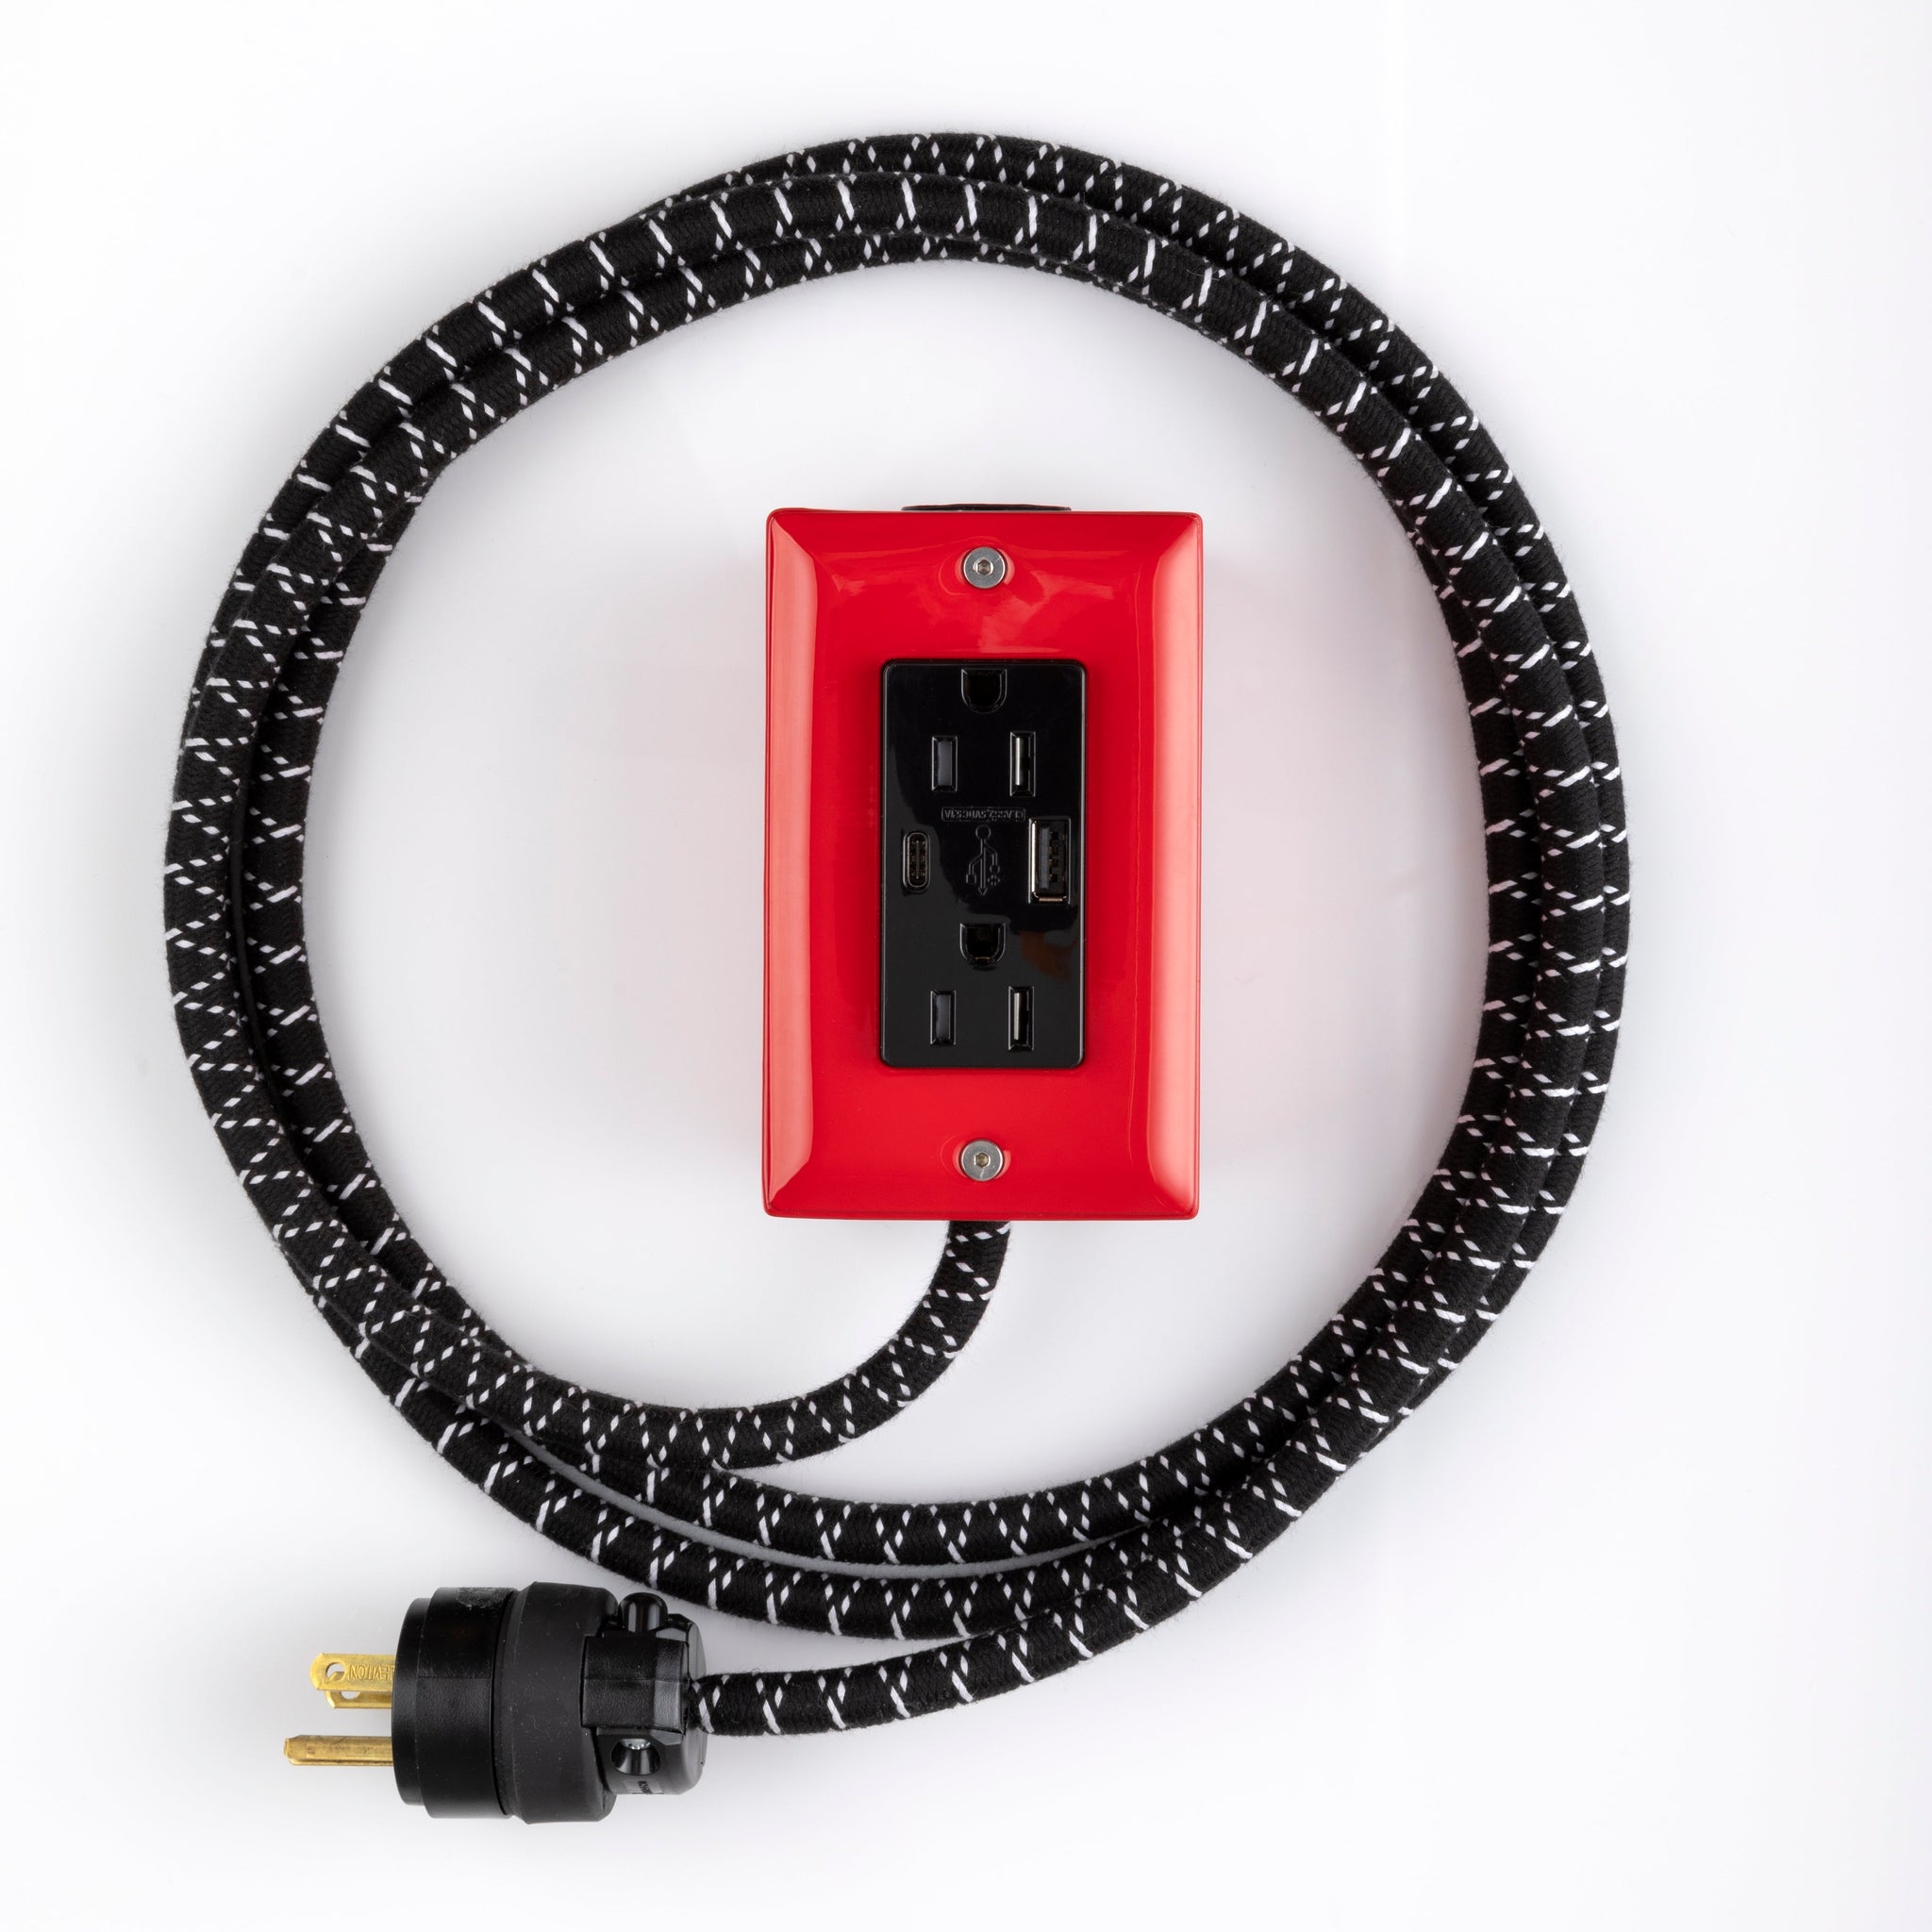 New! The First Smart Chip USB Type C® Bottle Rocket Red Extension Cord - 8' Extō USBA/USBC Port, Dual-Outlet Power Cord